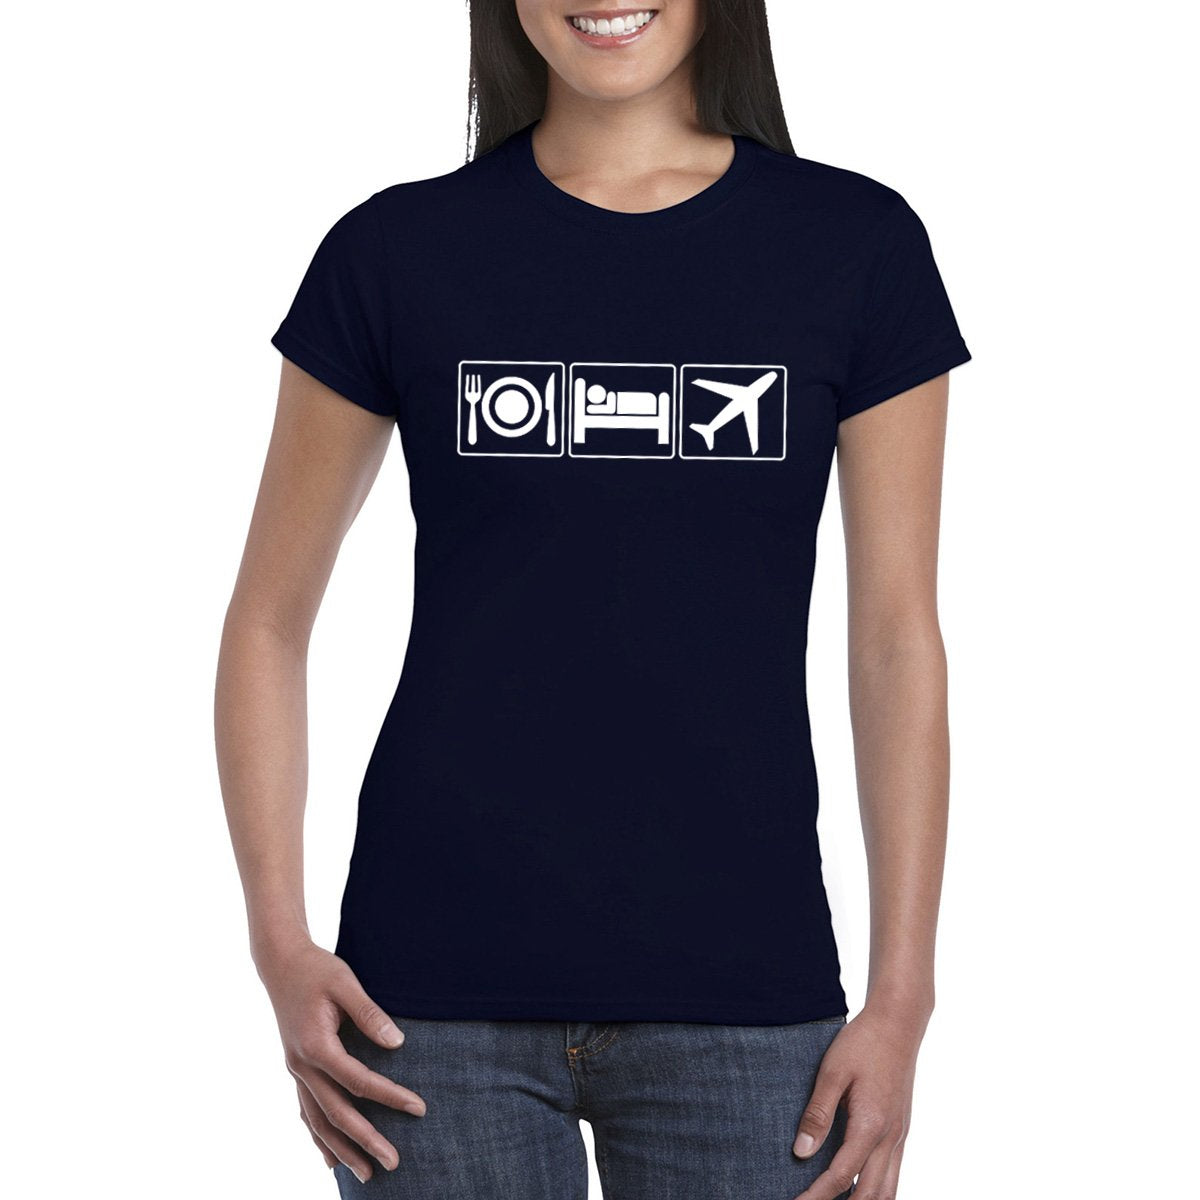 EAT SLEEP FLY Semi-Fitted Women's T-Shirt